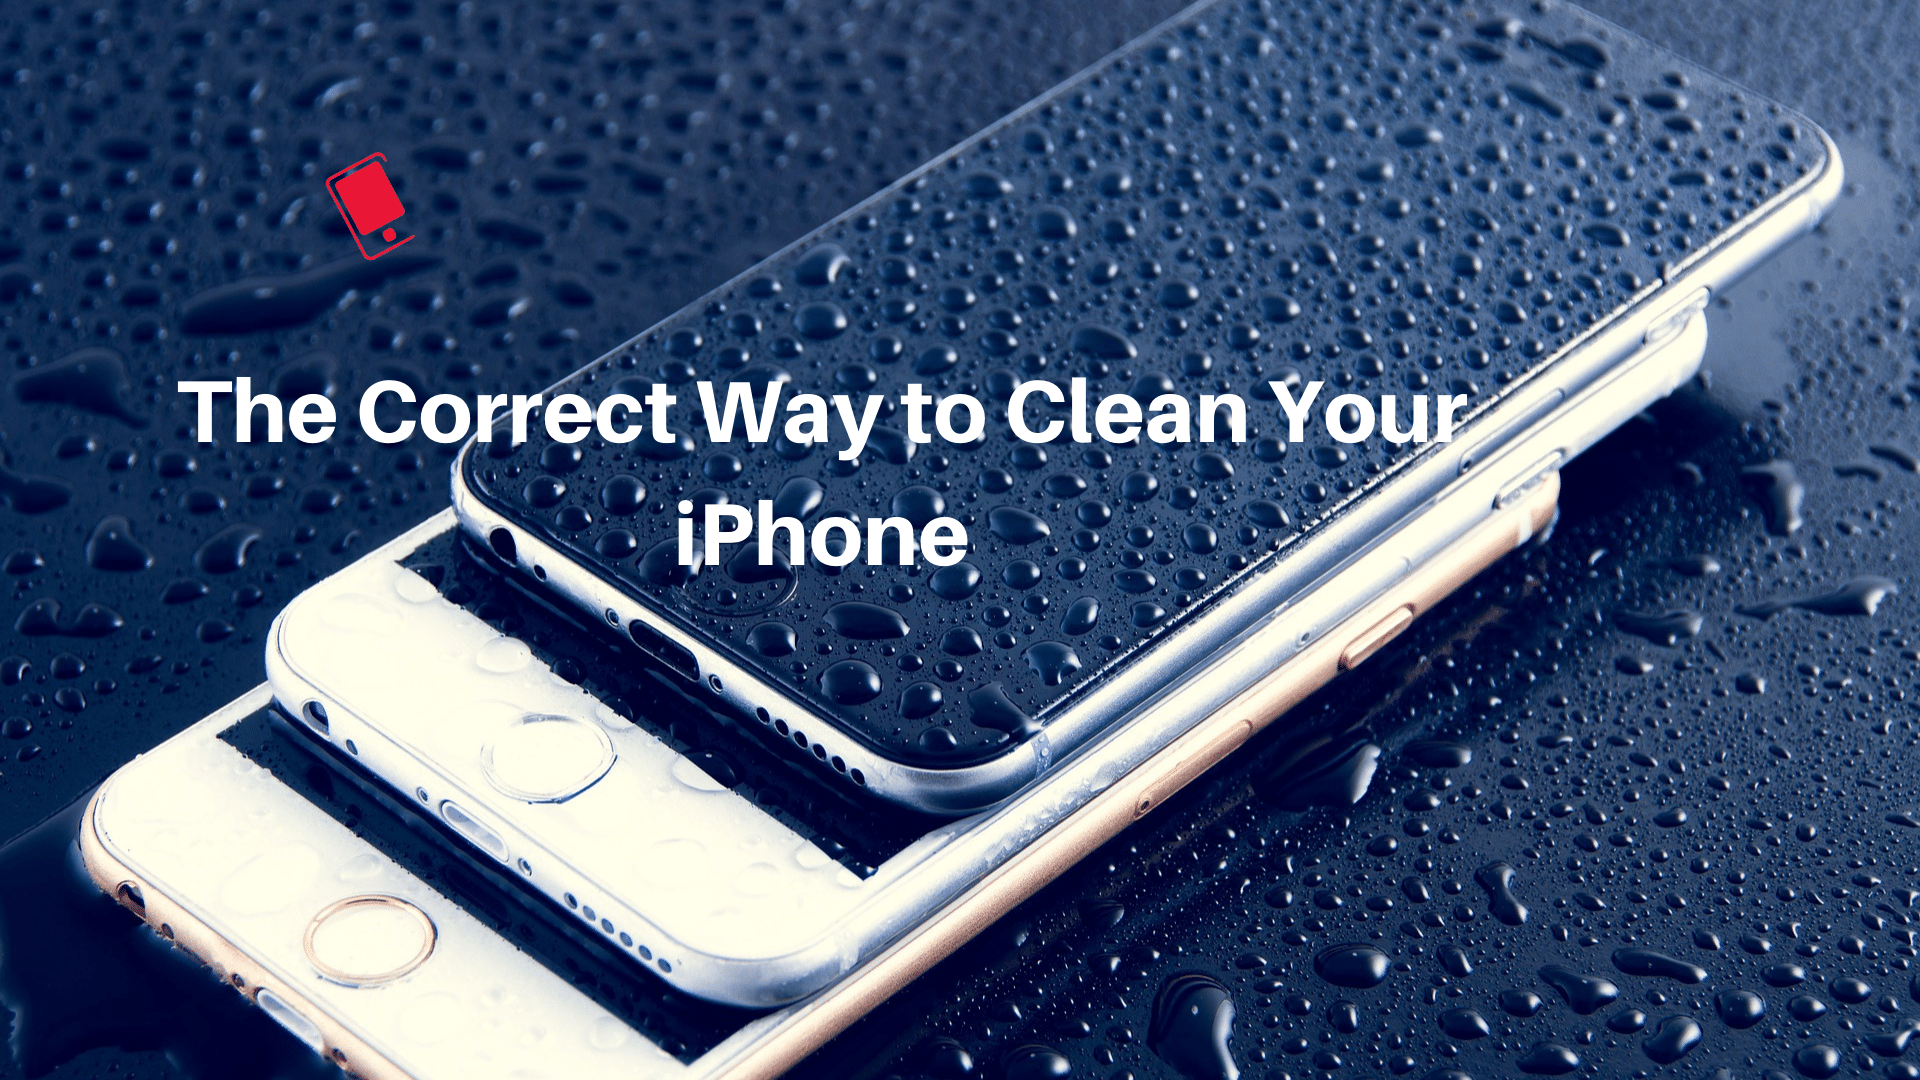 How to Clean and disinfect iPhone